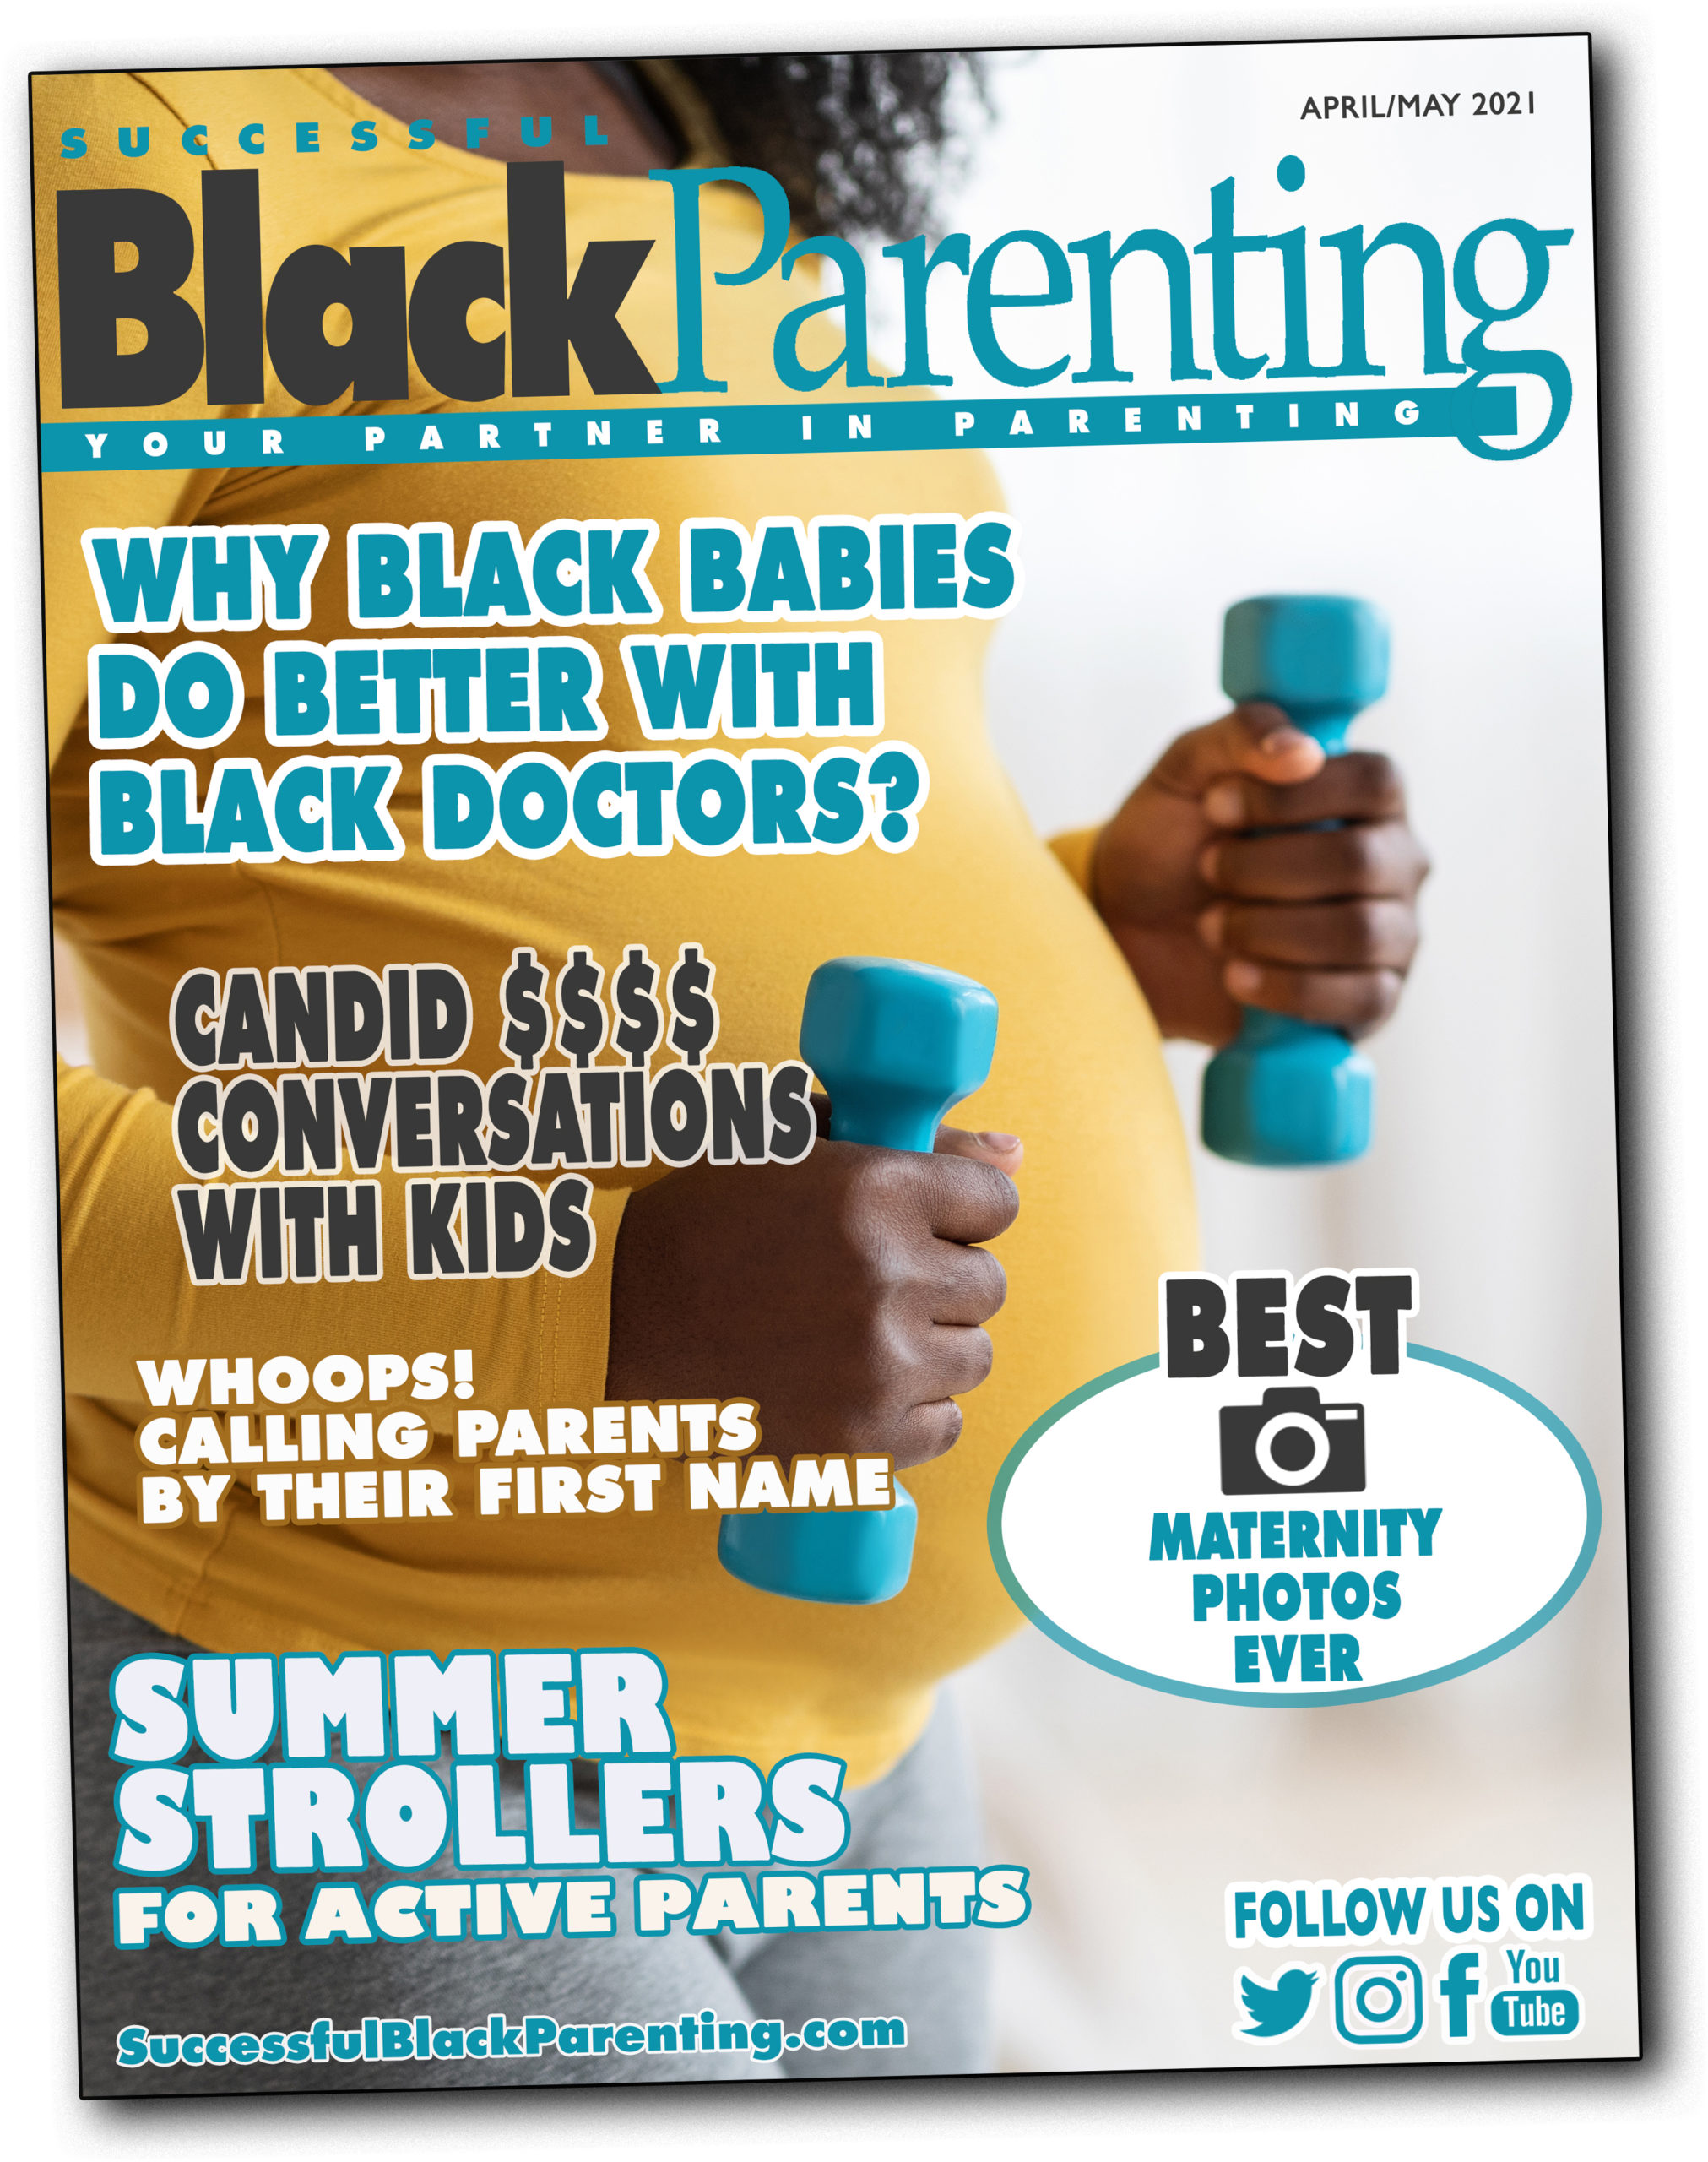 Sbp magazine april may 2021 cover2 scaled on successful black parenting magazine